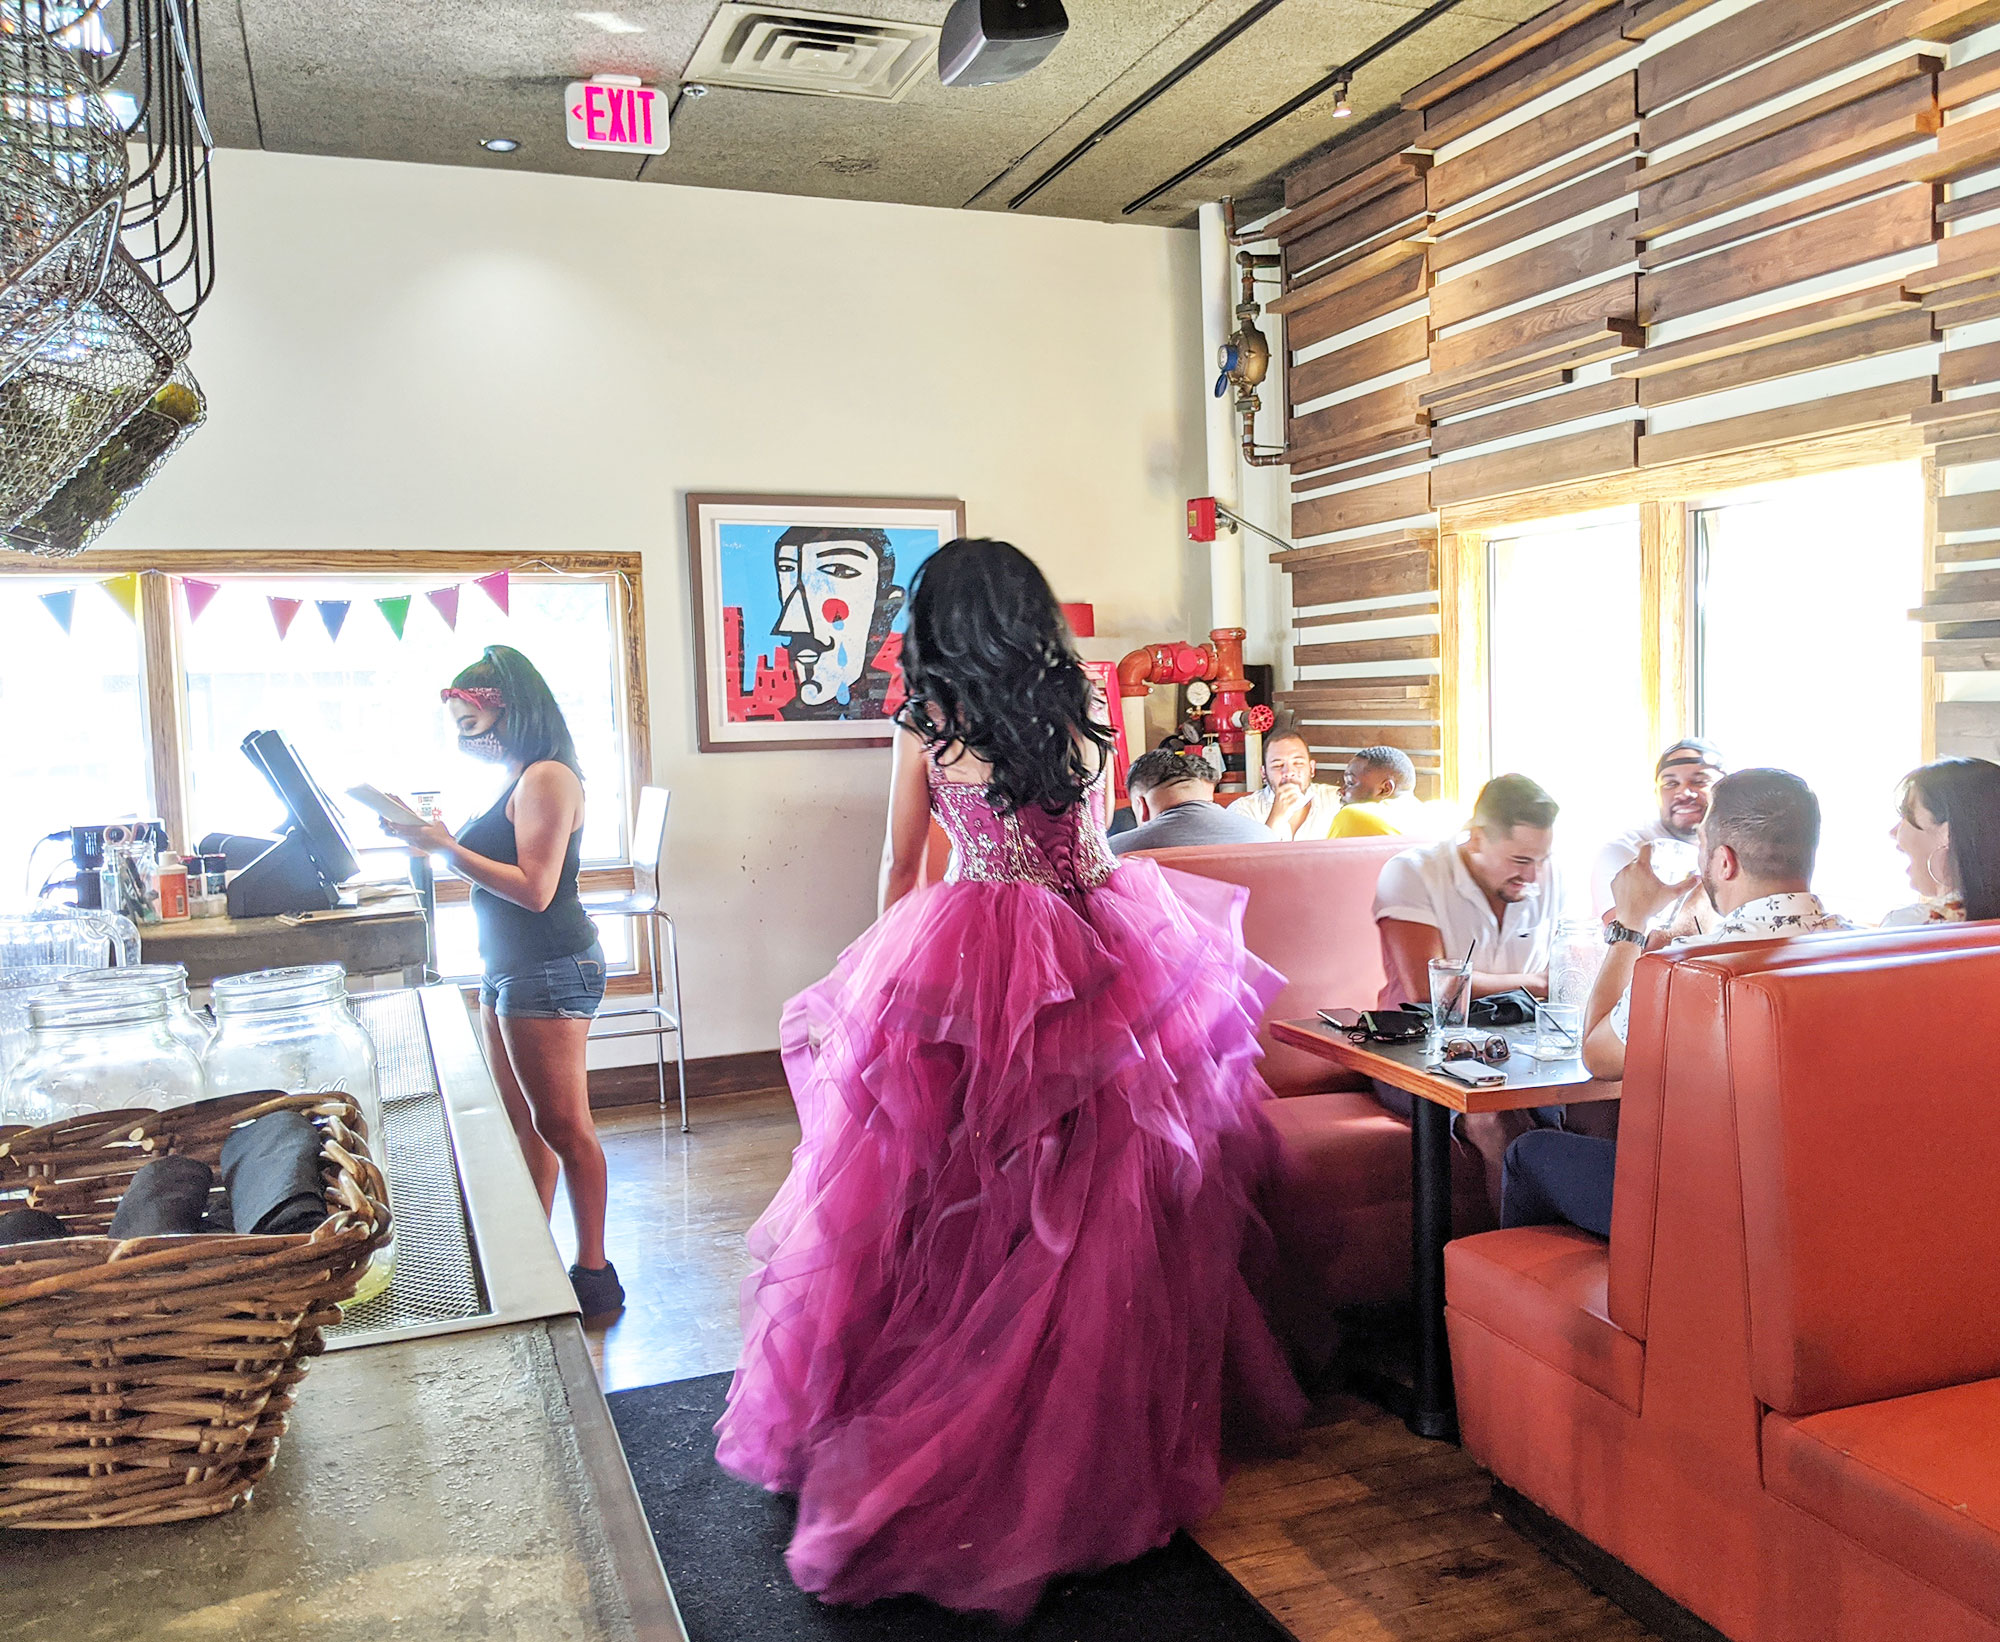 Mayra D'Lorenzo performing at TNT Drag Queen Brunch in Uptown Dallas.